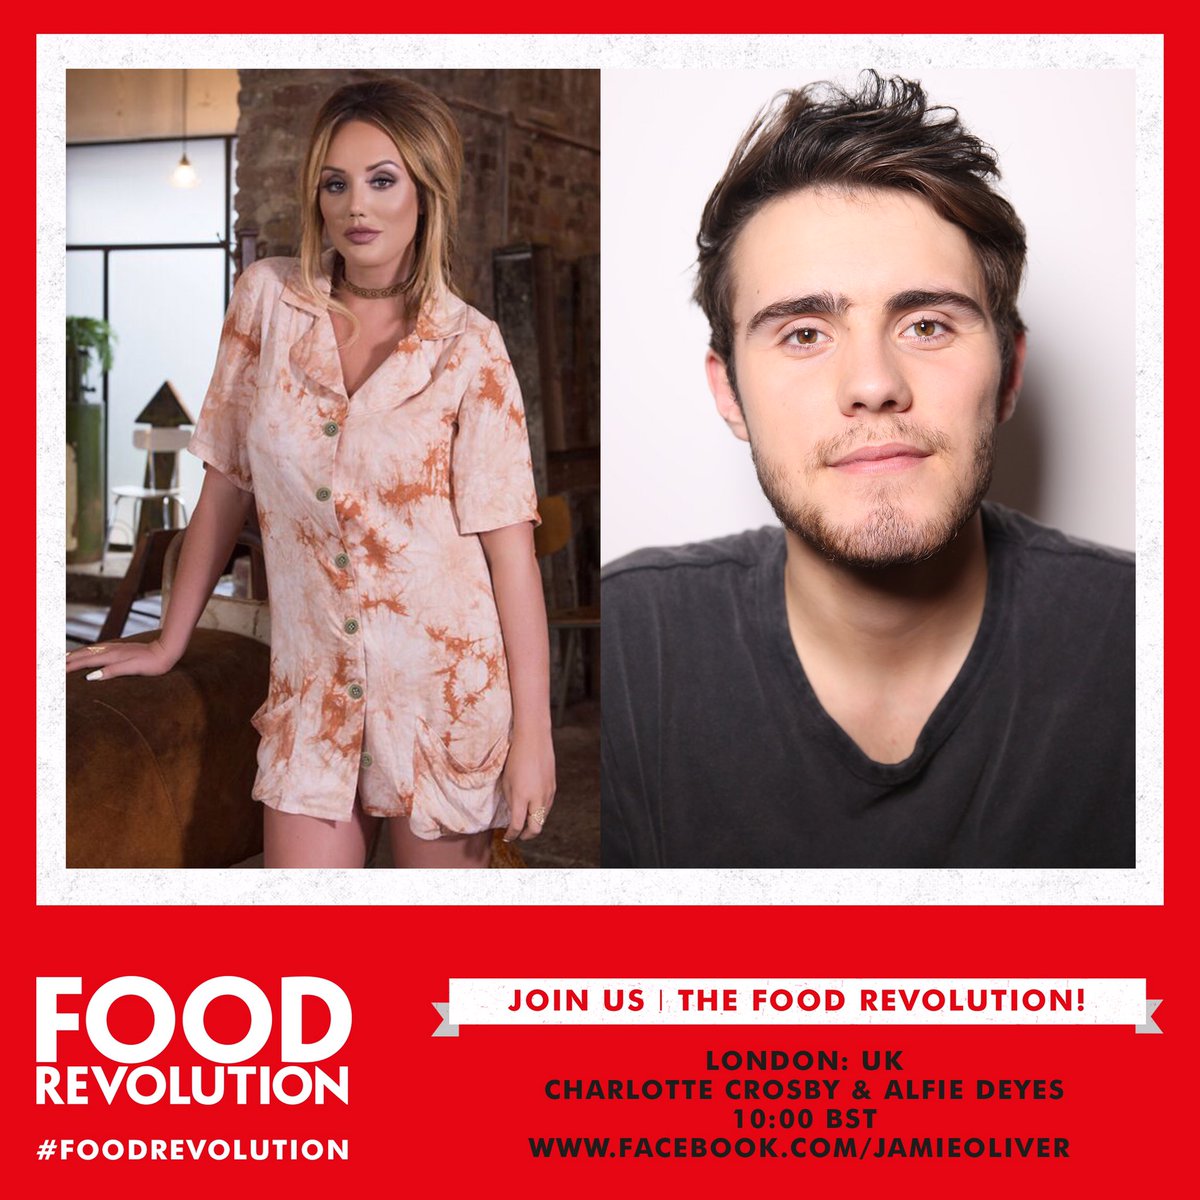 RT @Charlottegshore: I'm going to be cooking with @jamieoliver live on Facebook tomorrow 10am BST https://t.co/3WVN12qxdF #foodrevolution h…